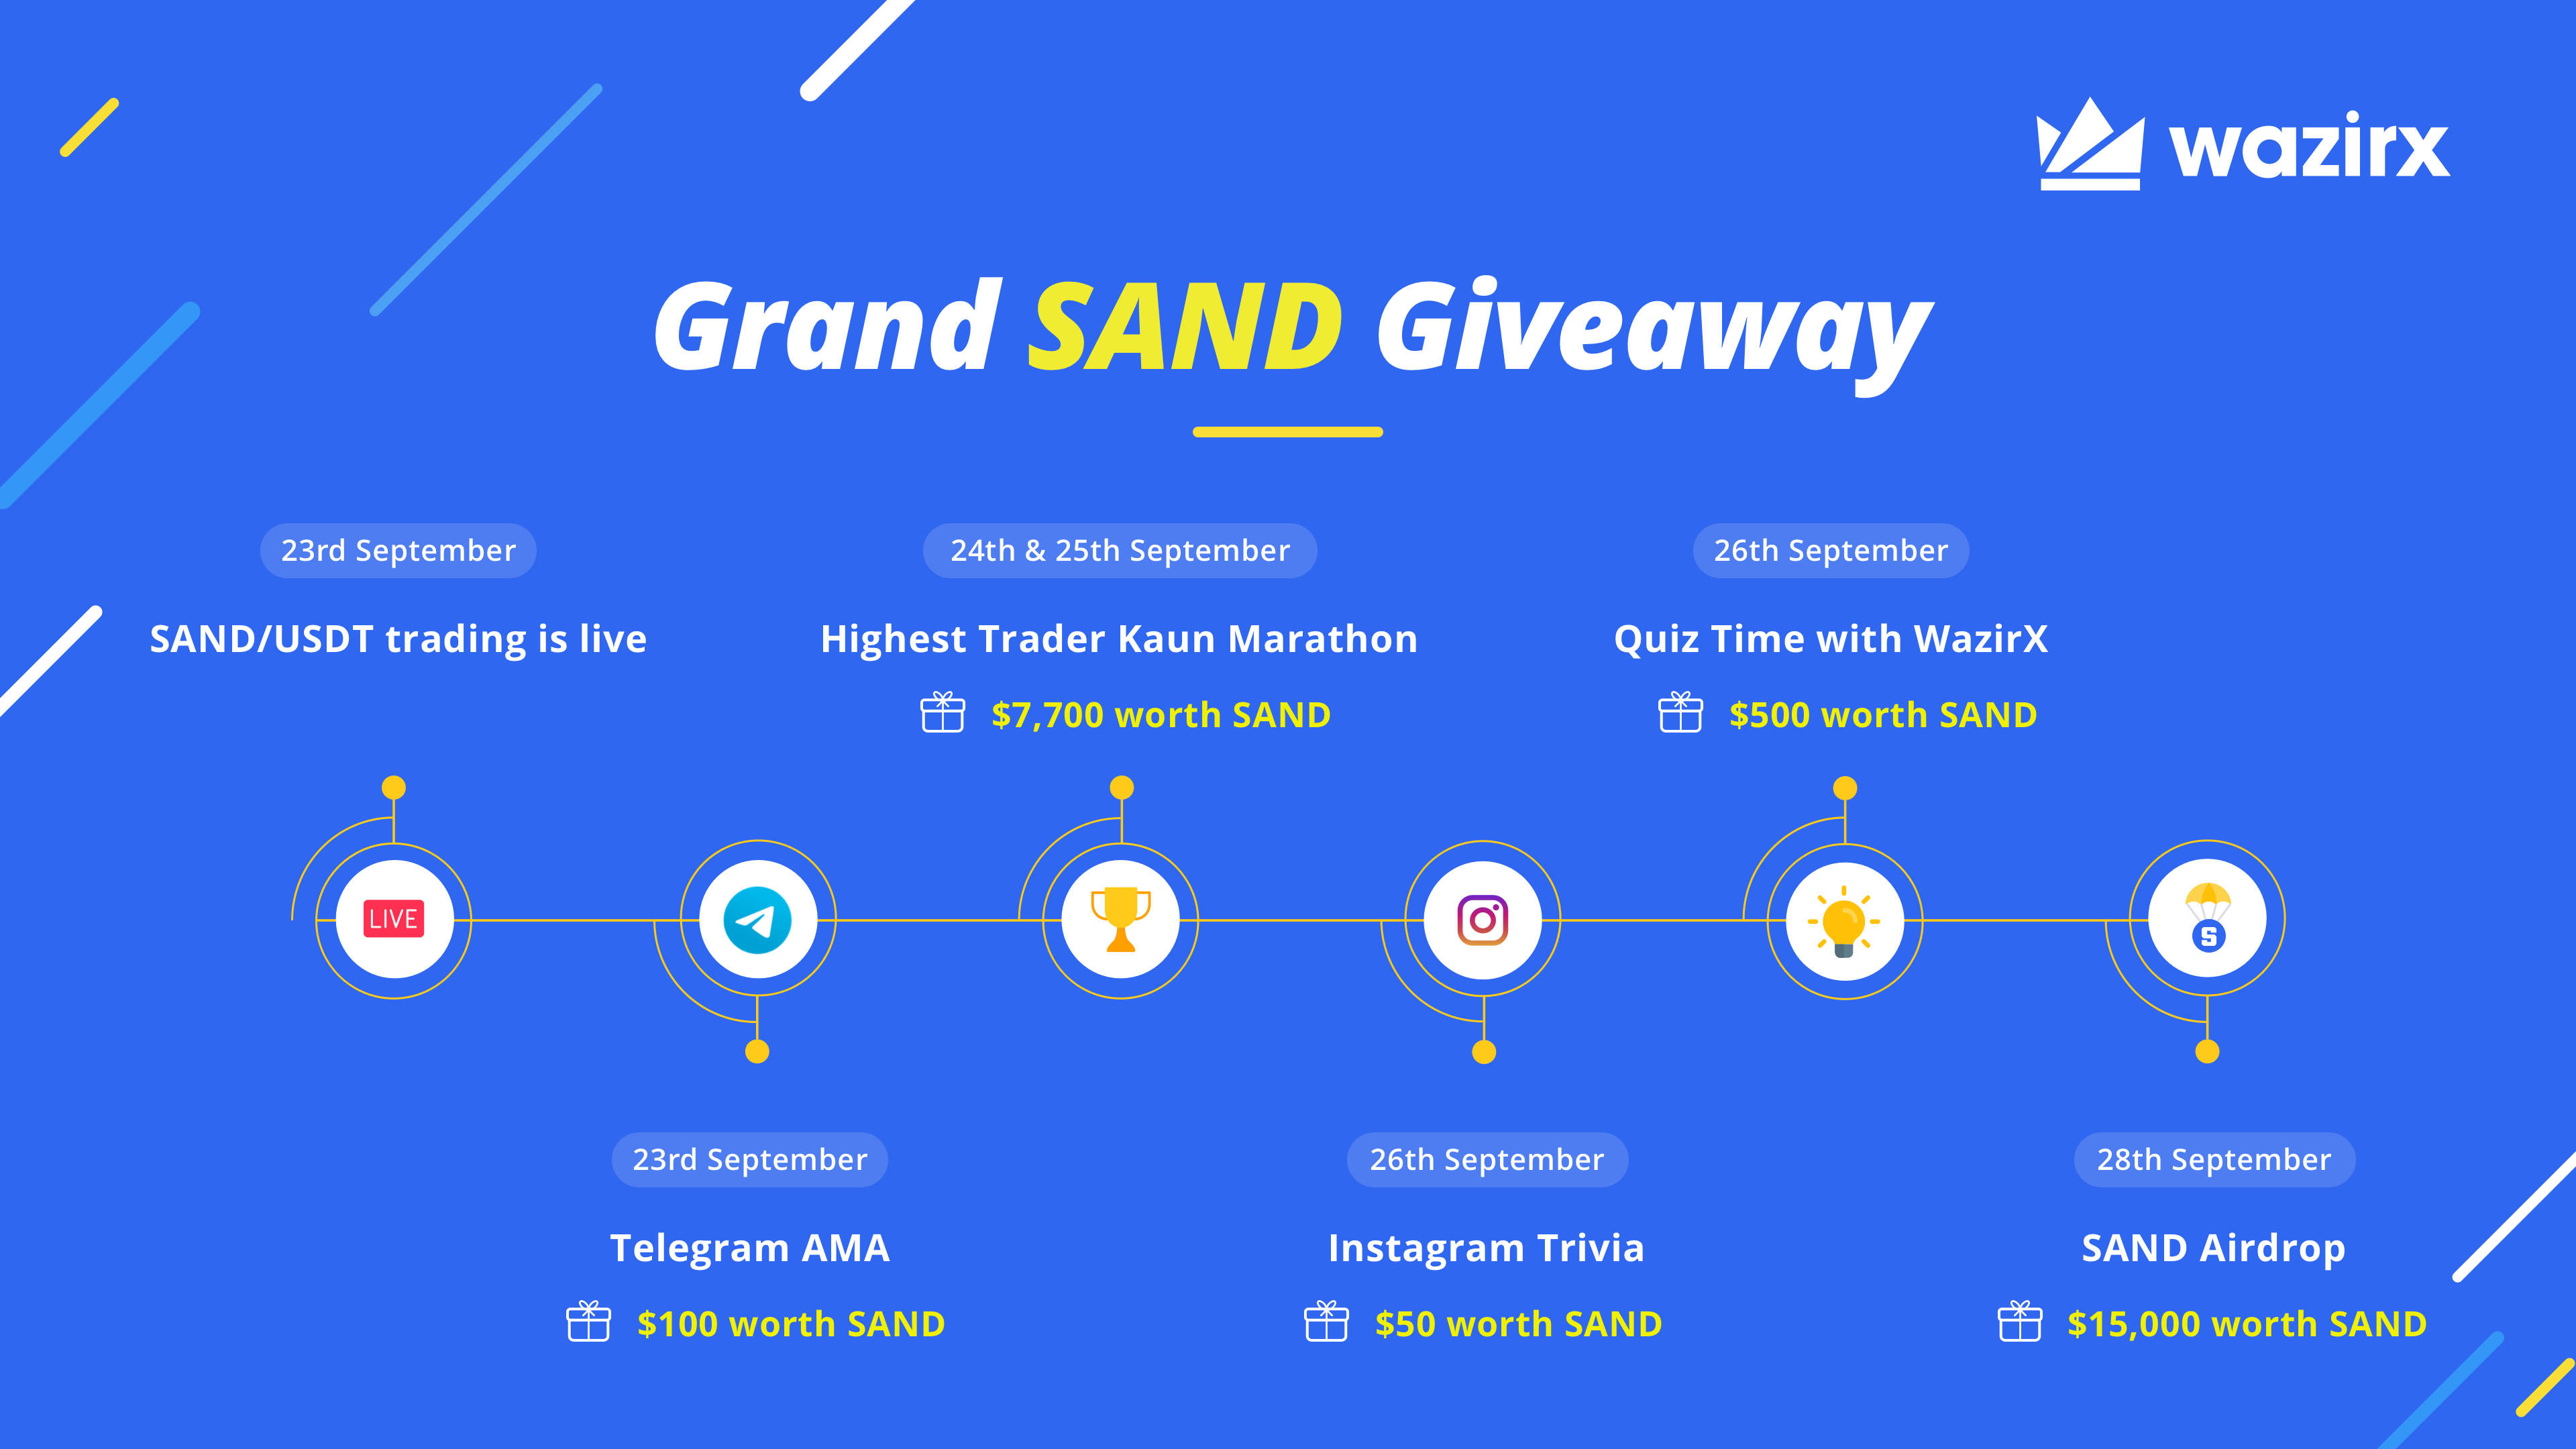 Grand SAND Giveaway